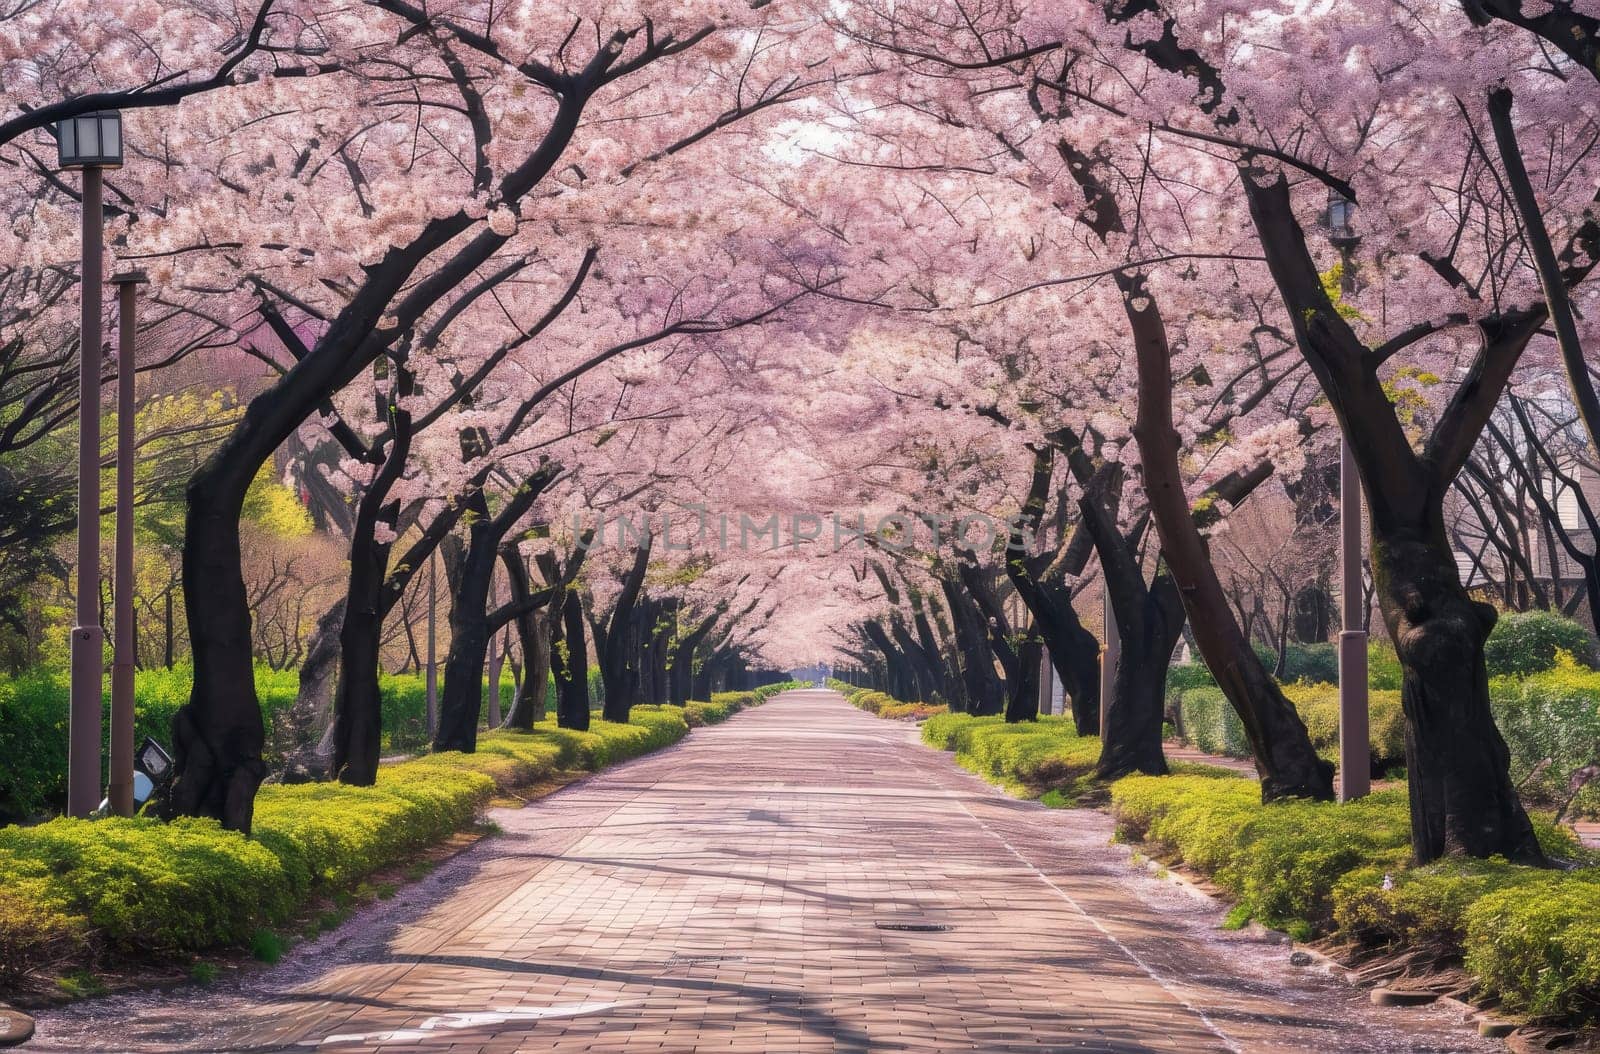 A long street filled with an impressive number of pink trees lined on both sides